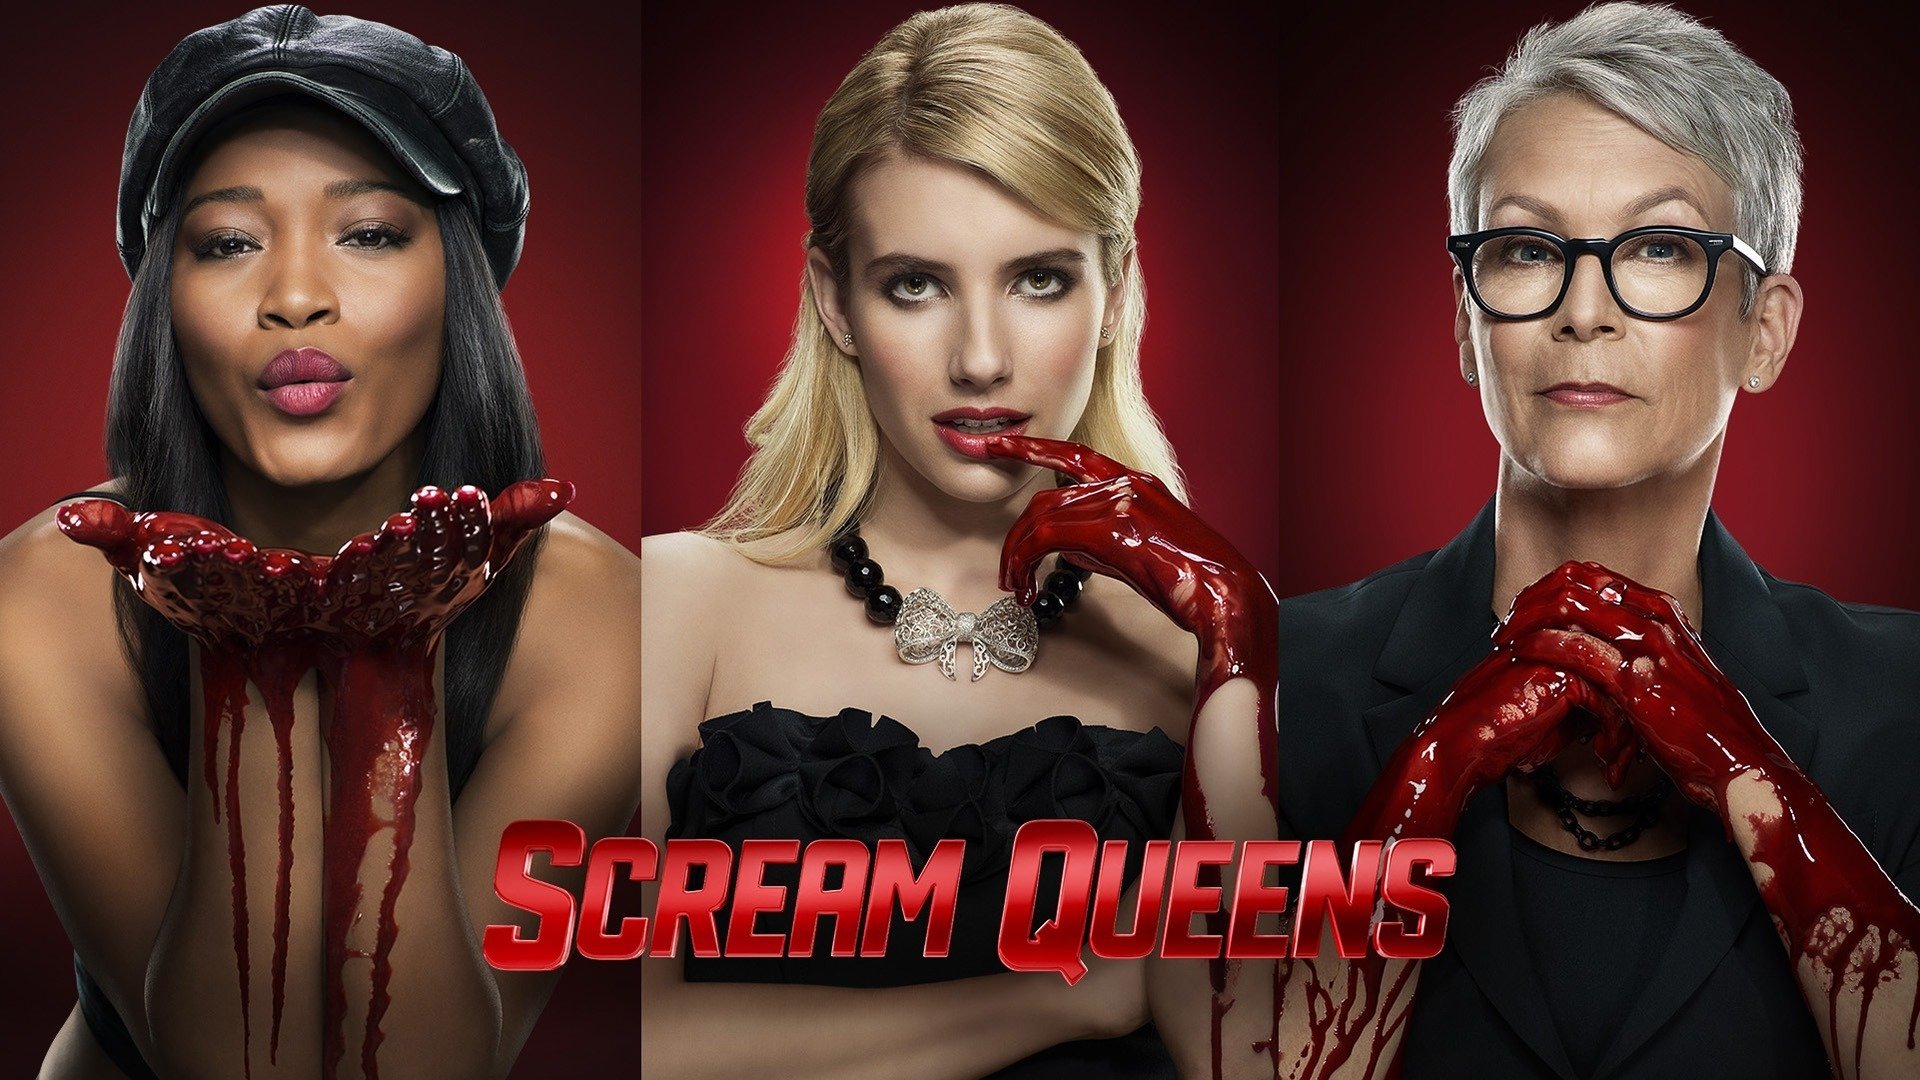 What age rating is scream queens